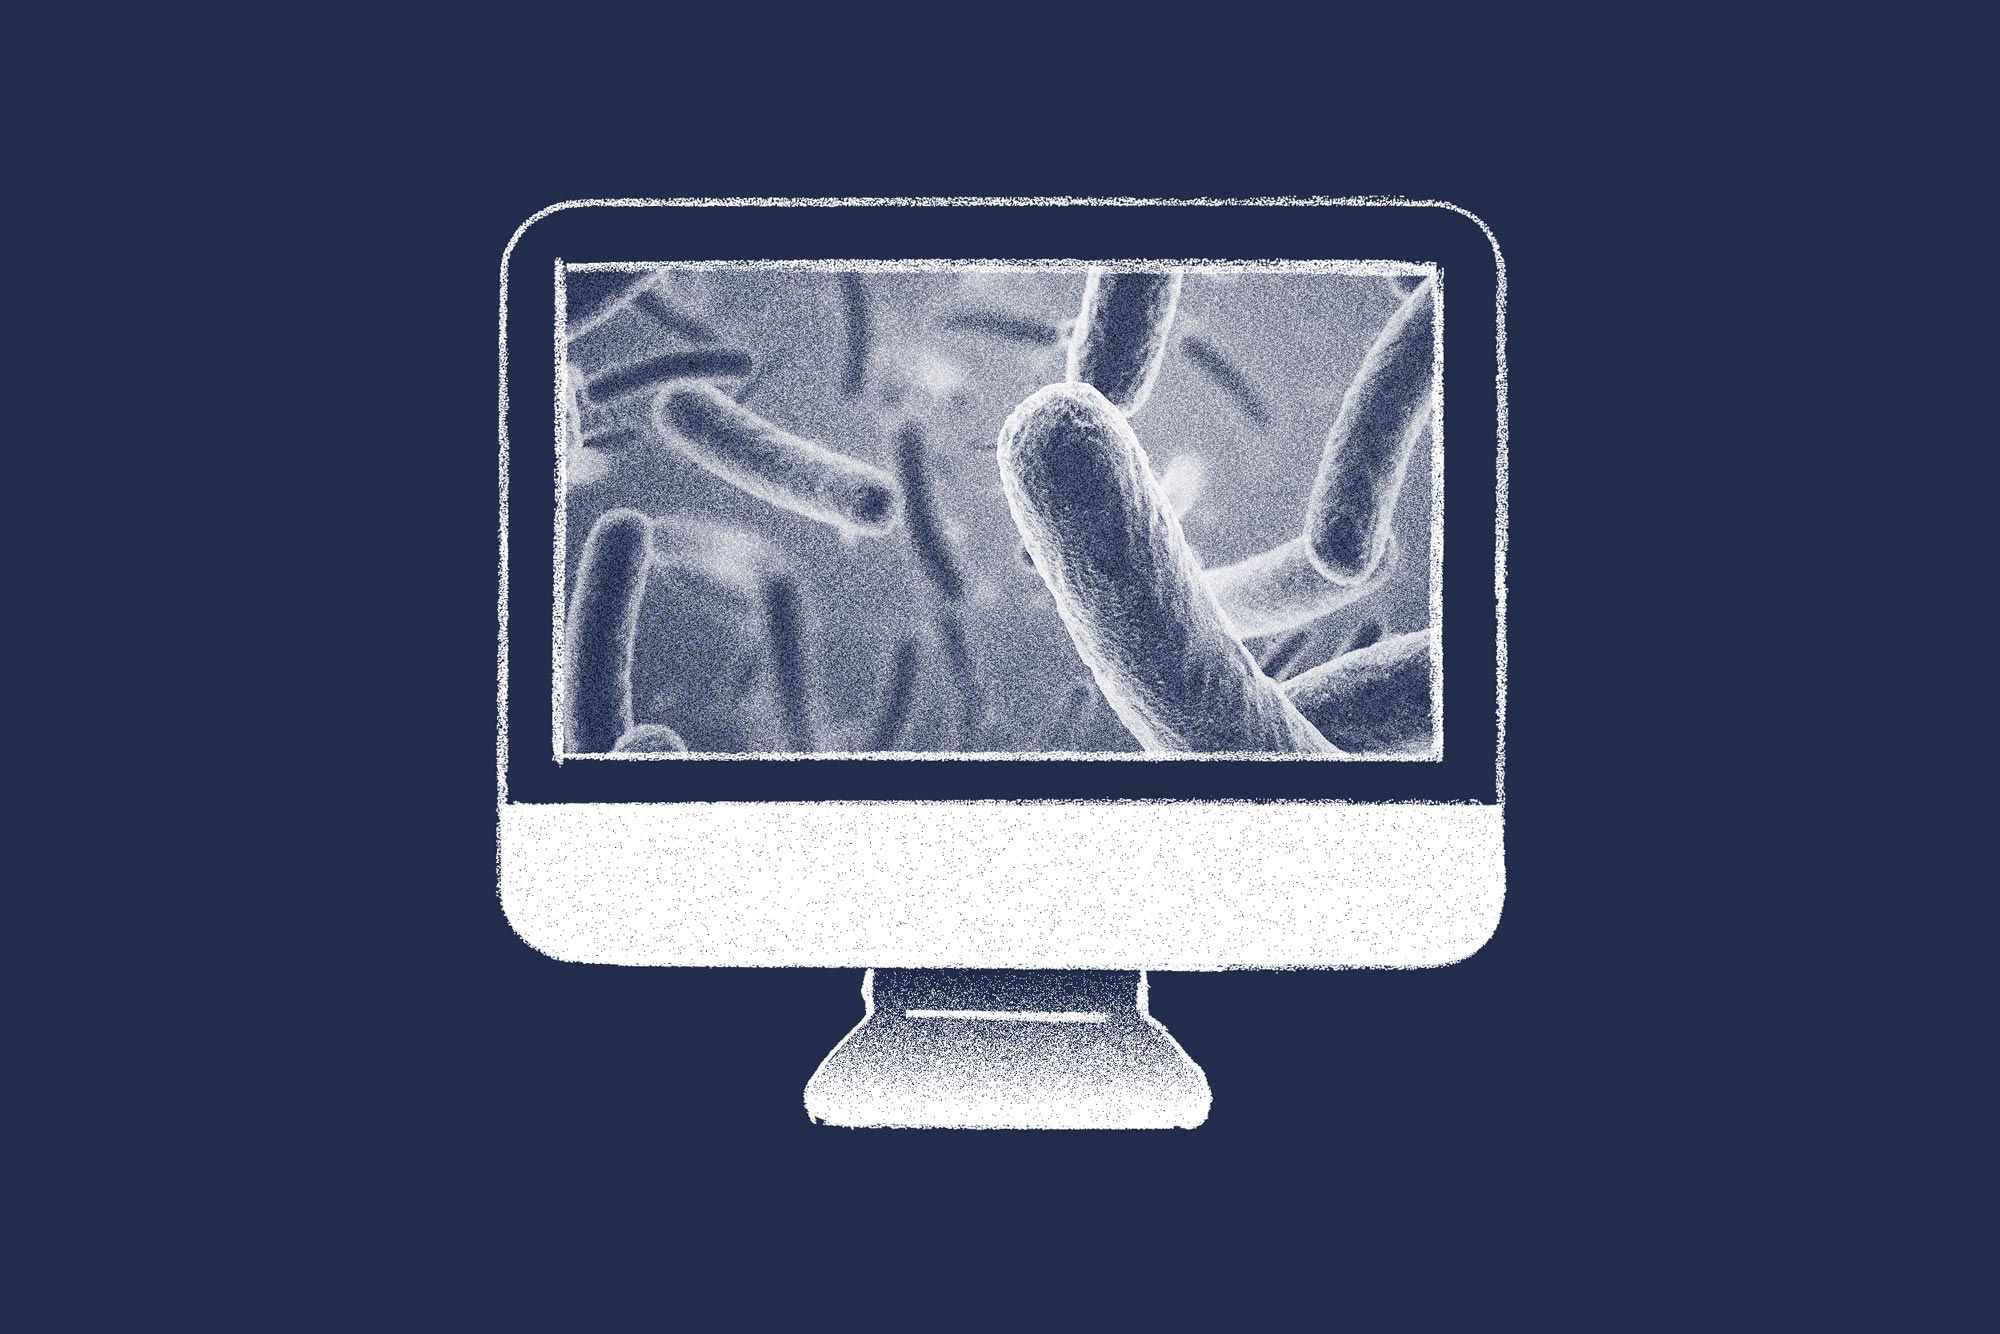 illustration of organisms on a microscope slide on a computer monitor